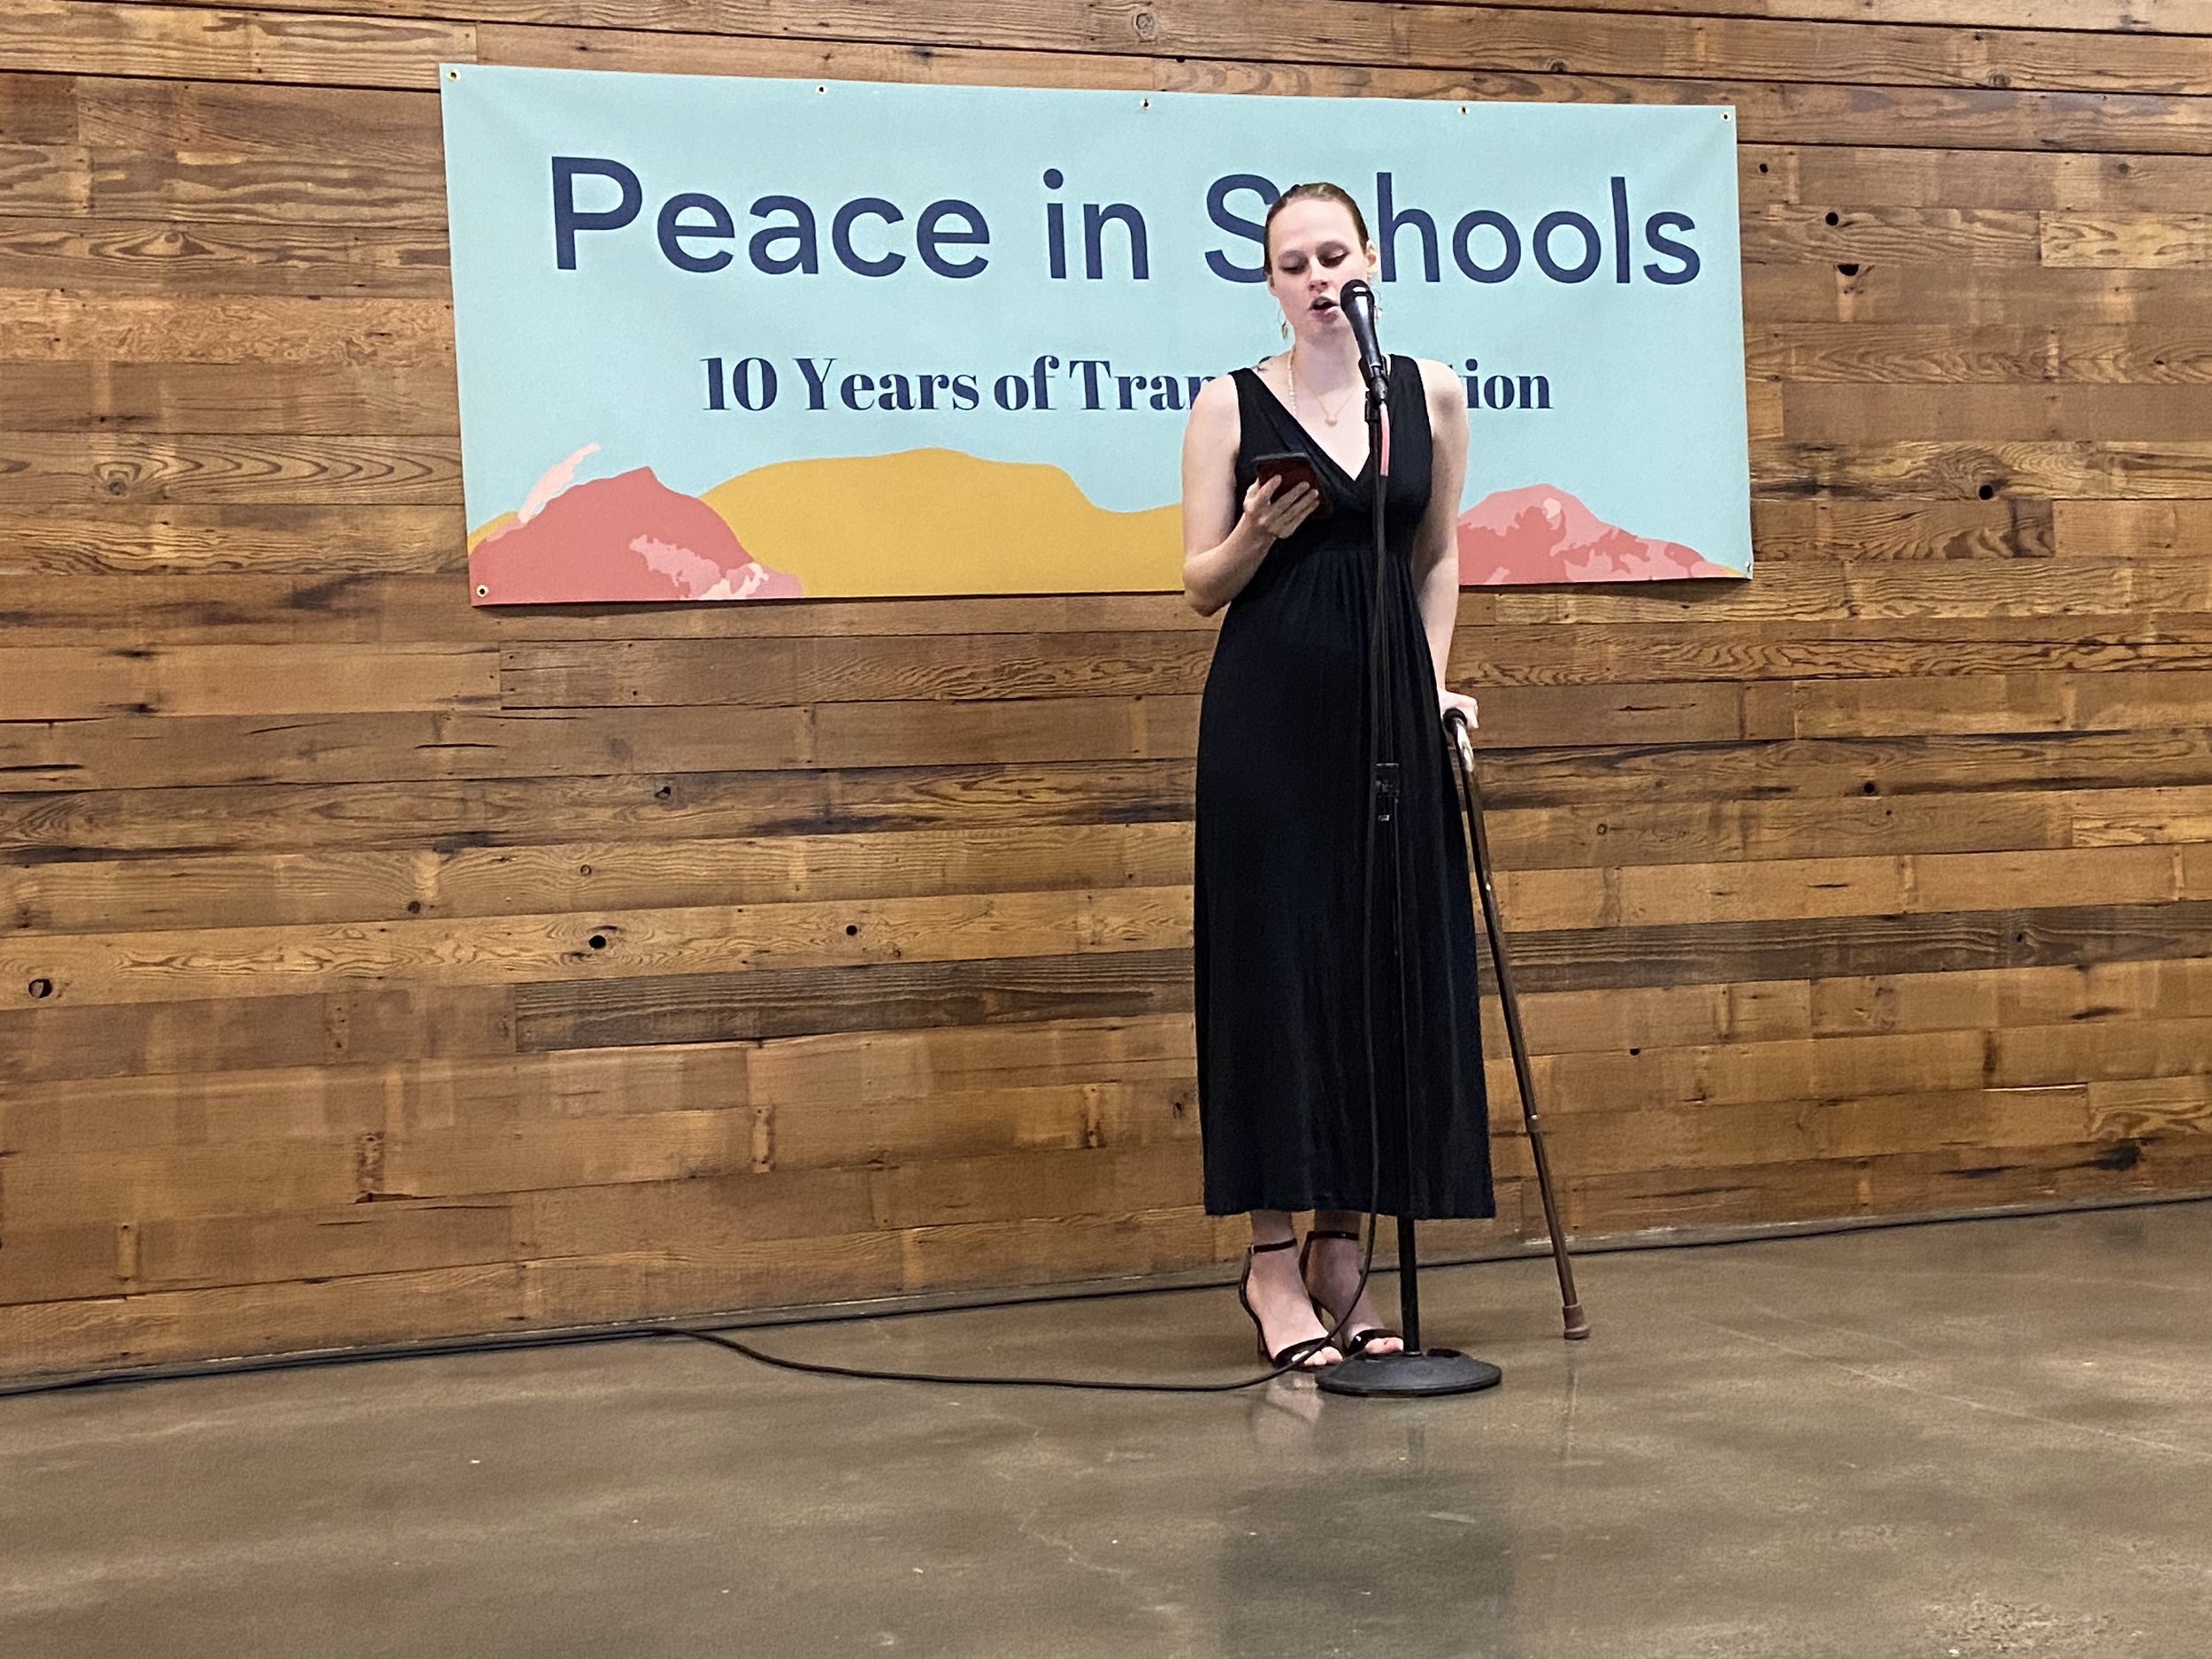 Mindful Studies alumni, Zoë, sharing how our class impacted her, and her conviction that mindfulness education should be accessible to all students. Watch Zoë's testimonial at the bottom of this page!